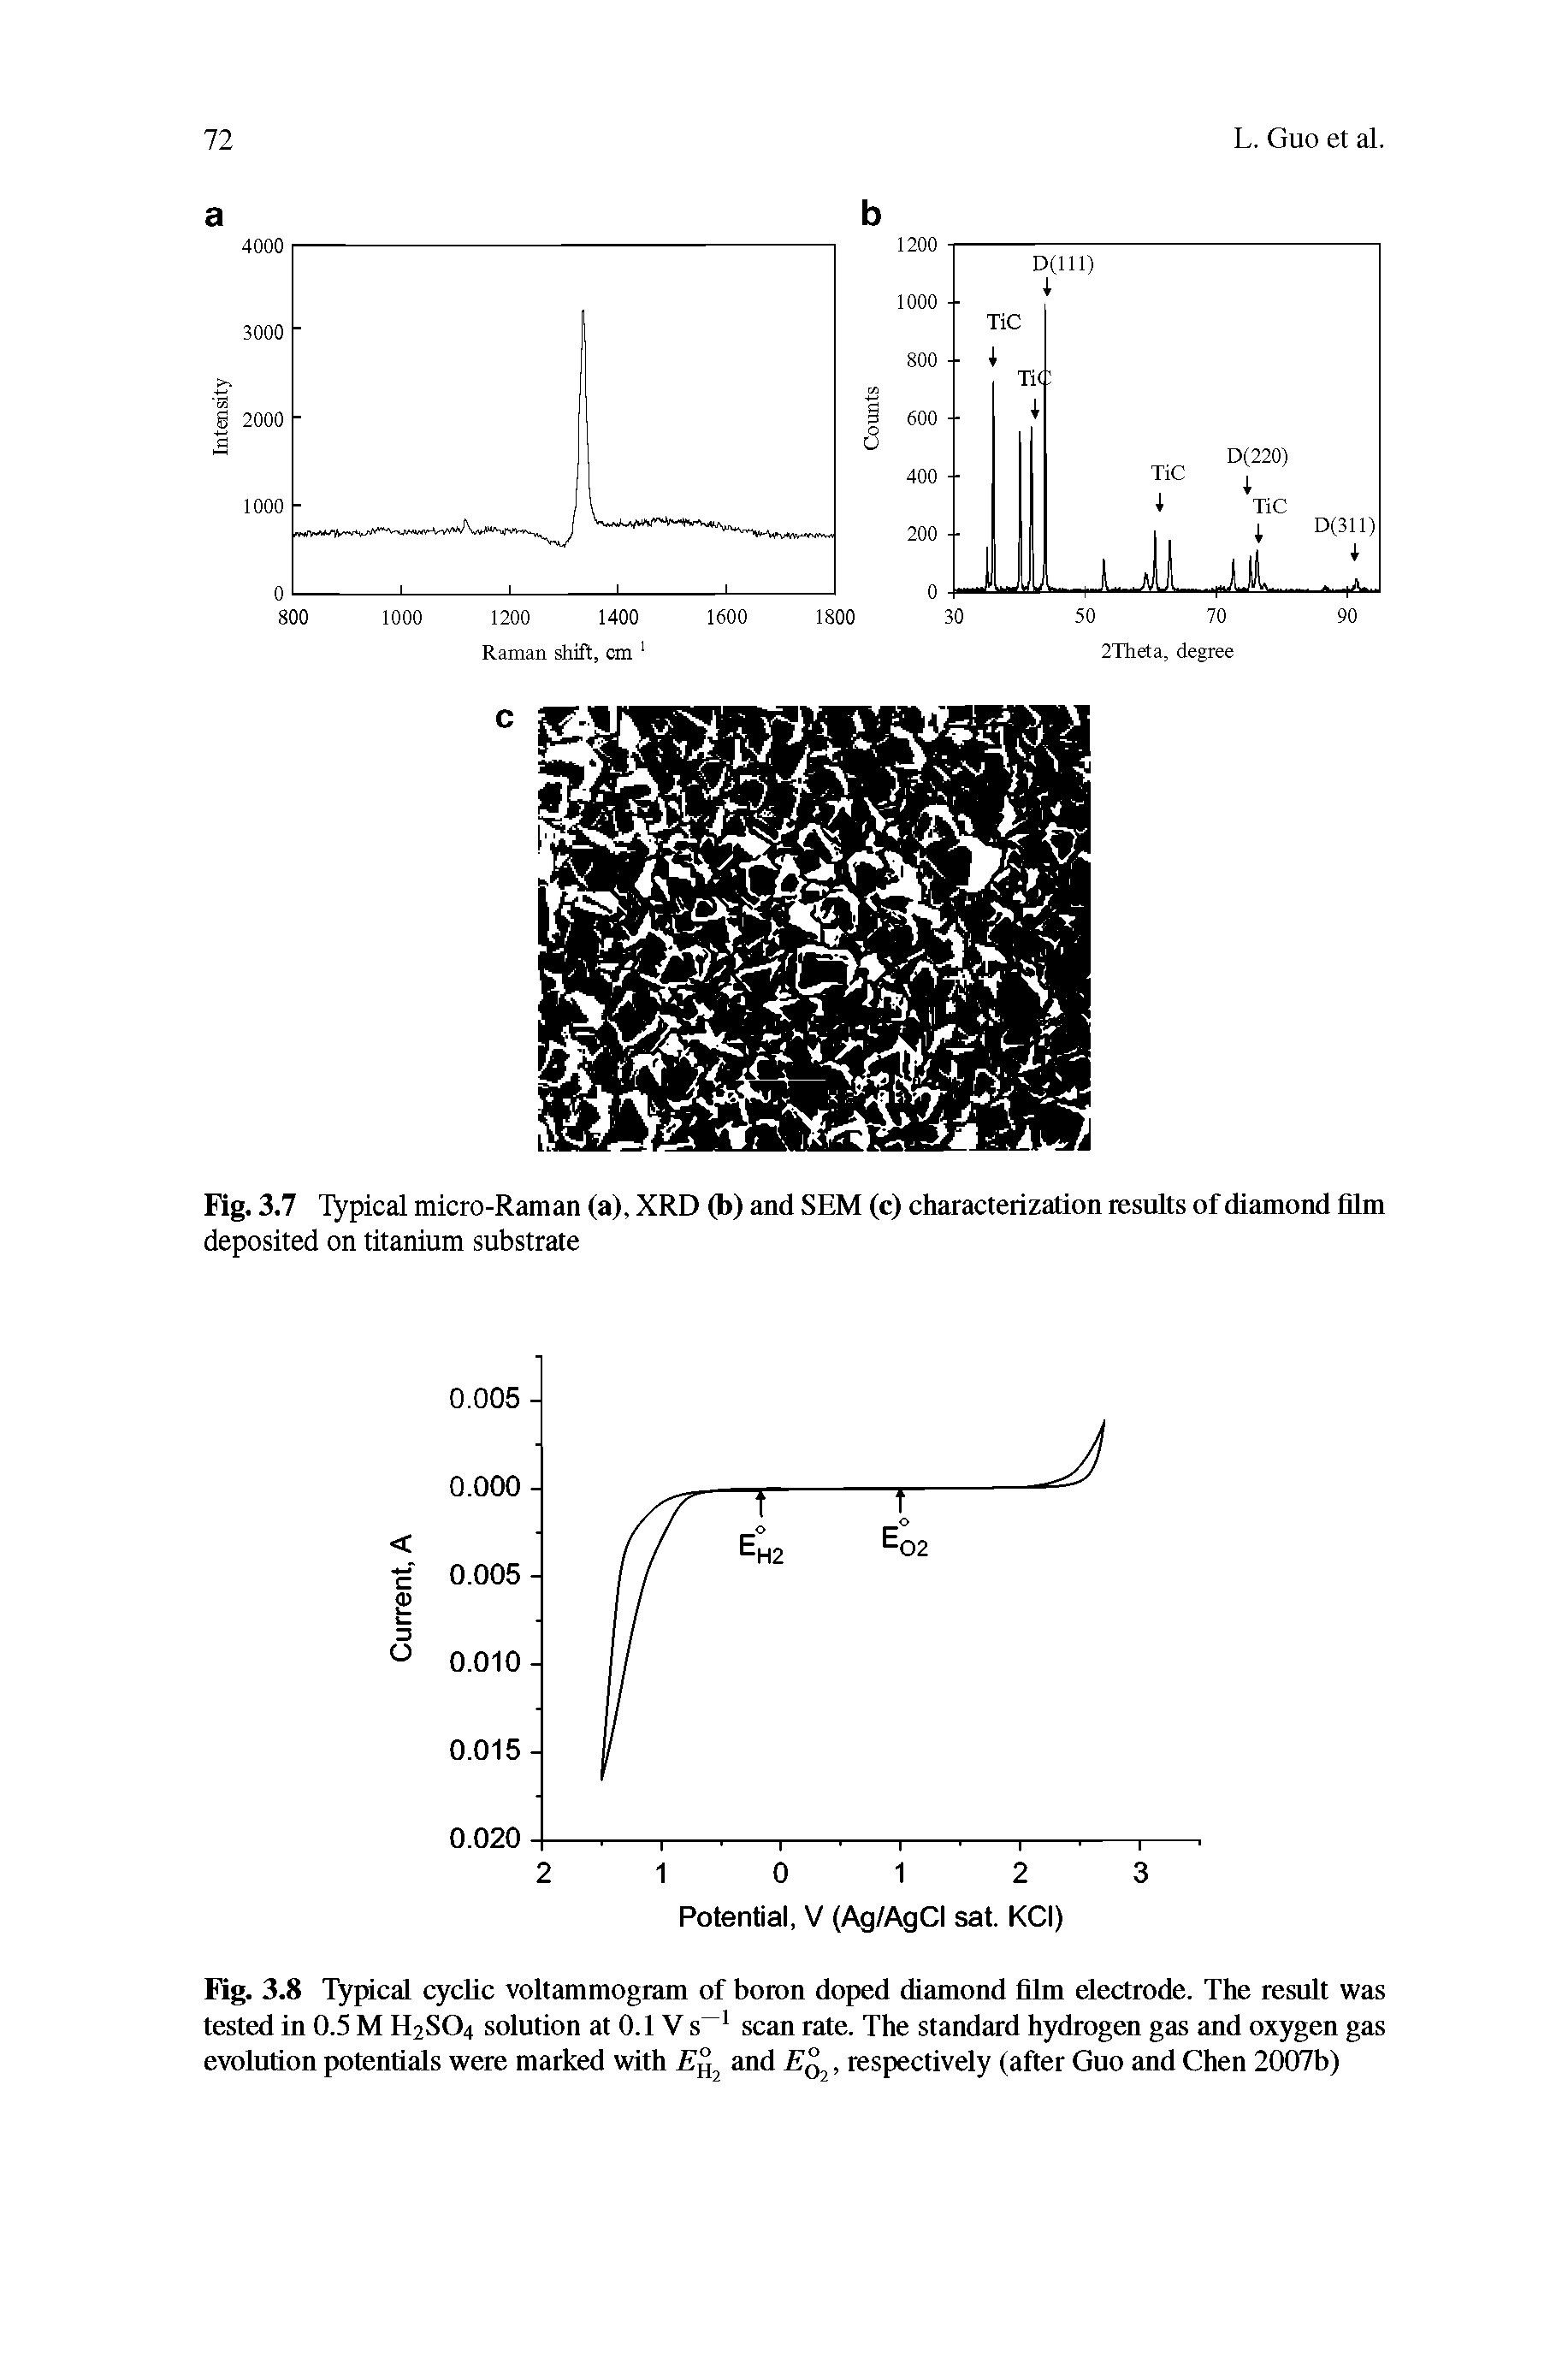 Fig. 3.7 Typical micro-Raman (a), XRD (b) and SEM (c) characterization results of diamond film deposited on titanium substrate...